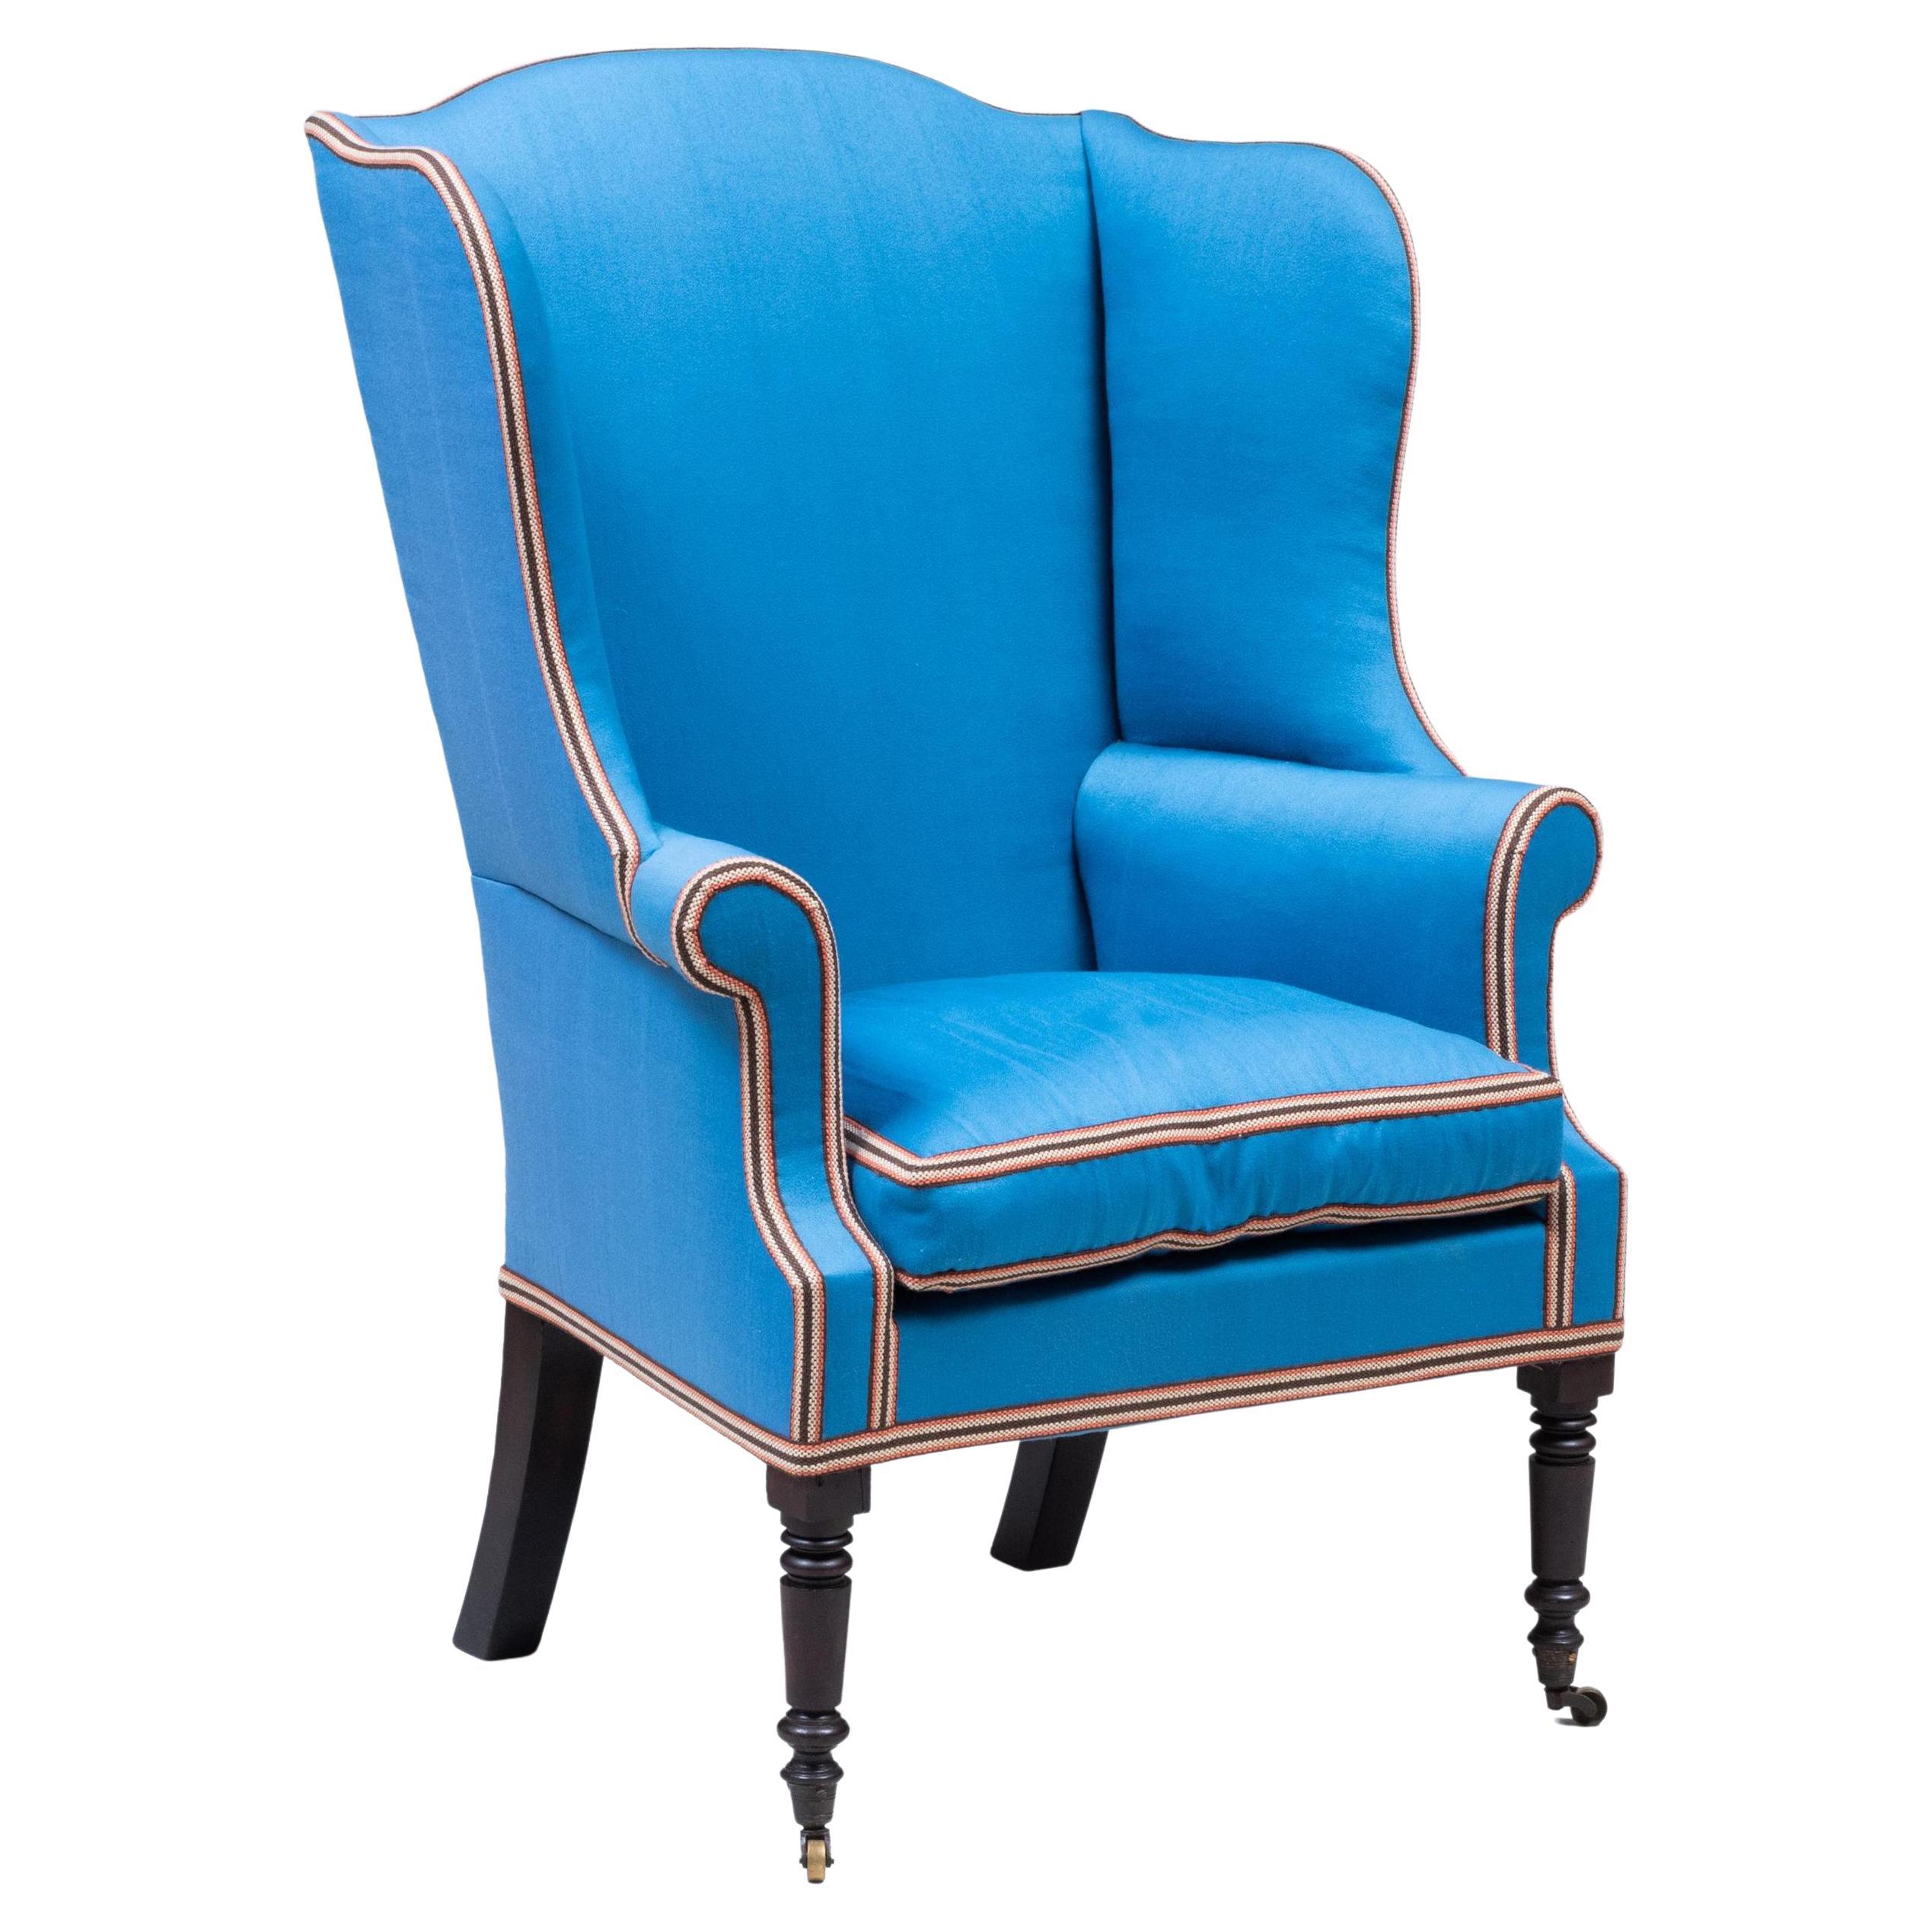 American Federal Wingback Chair with Blue Upholstery